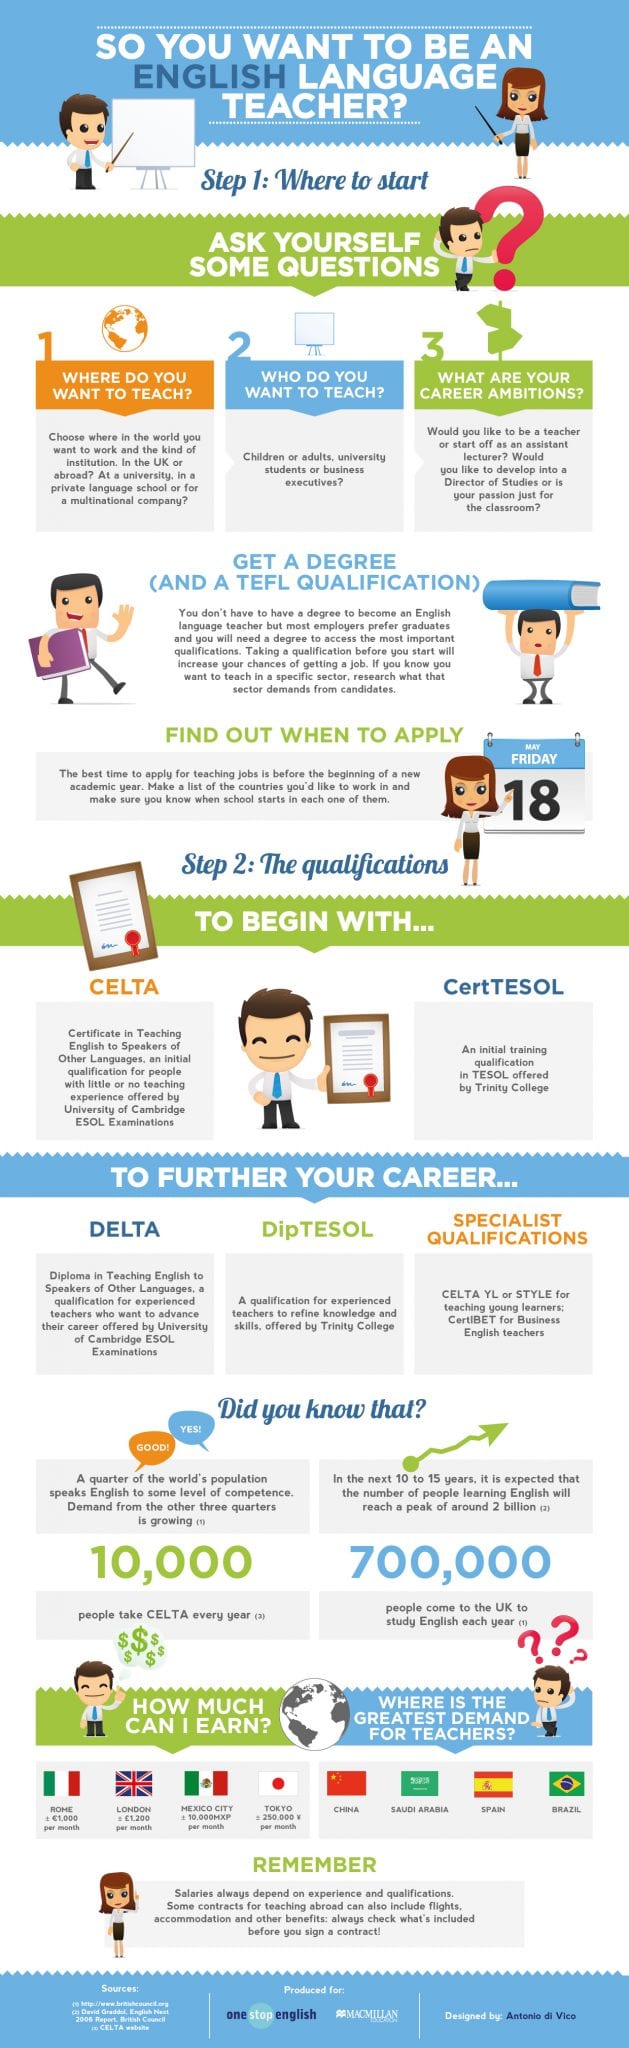 Want to Be an English Teacher? Start here (Infographic)